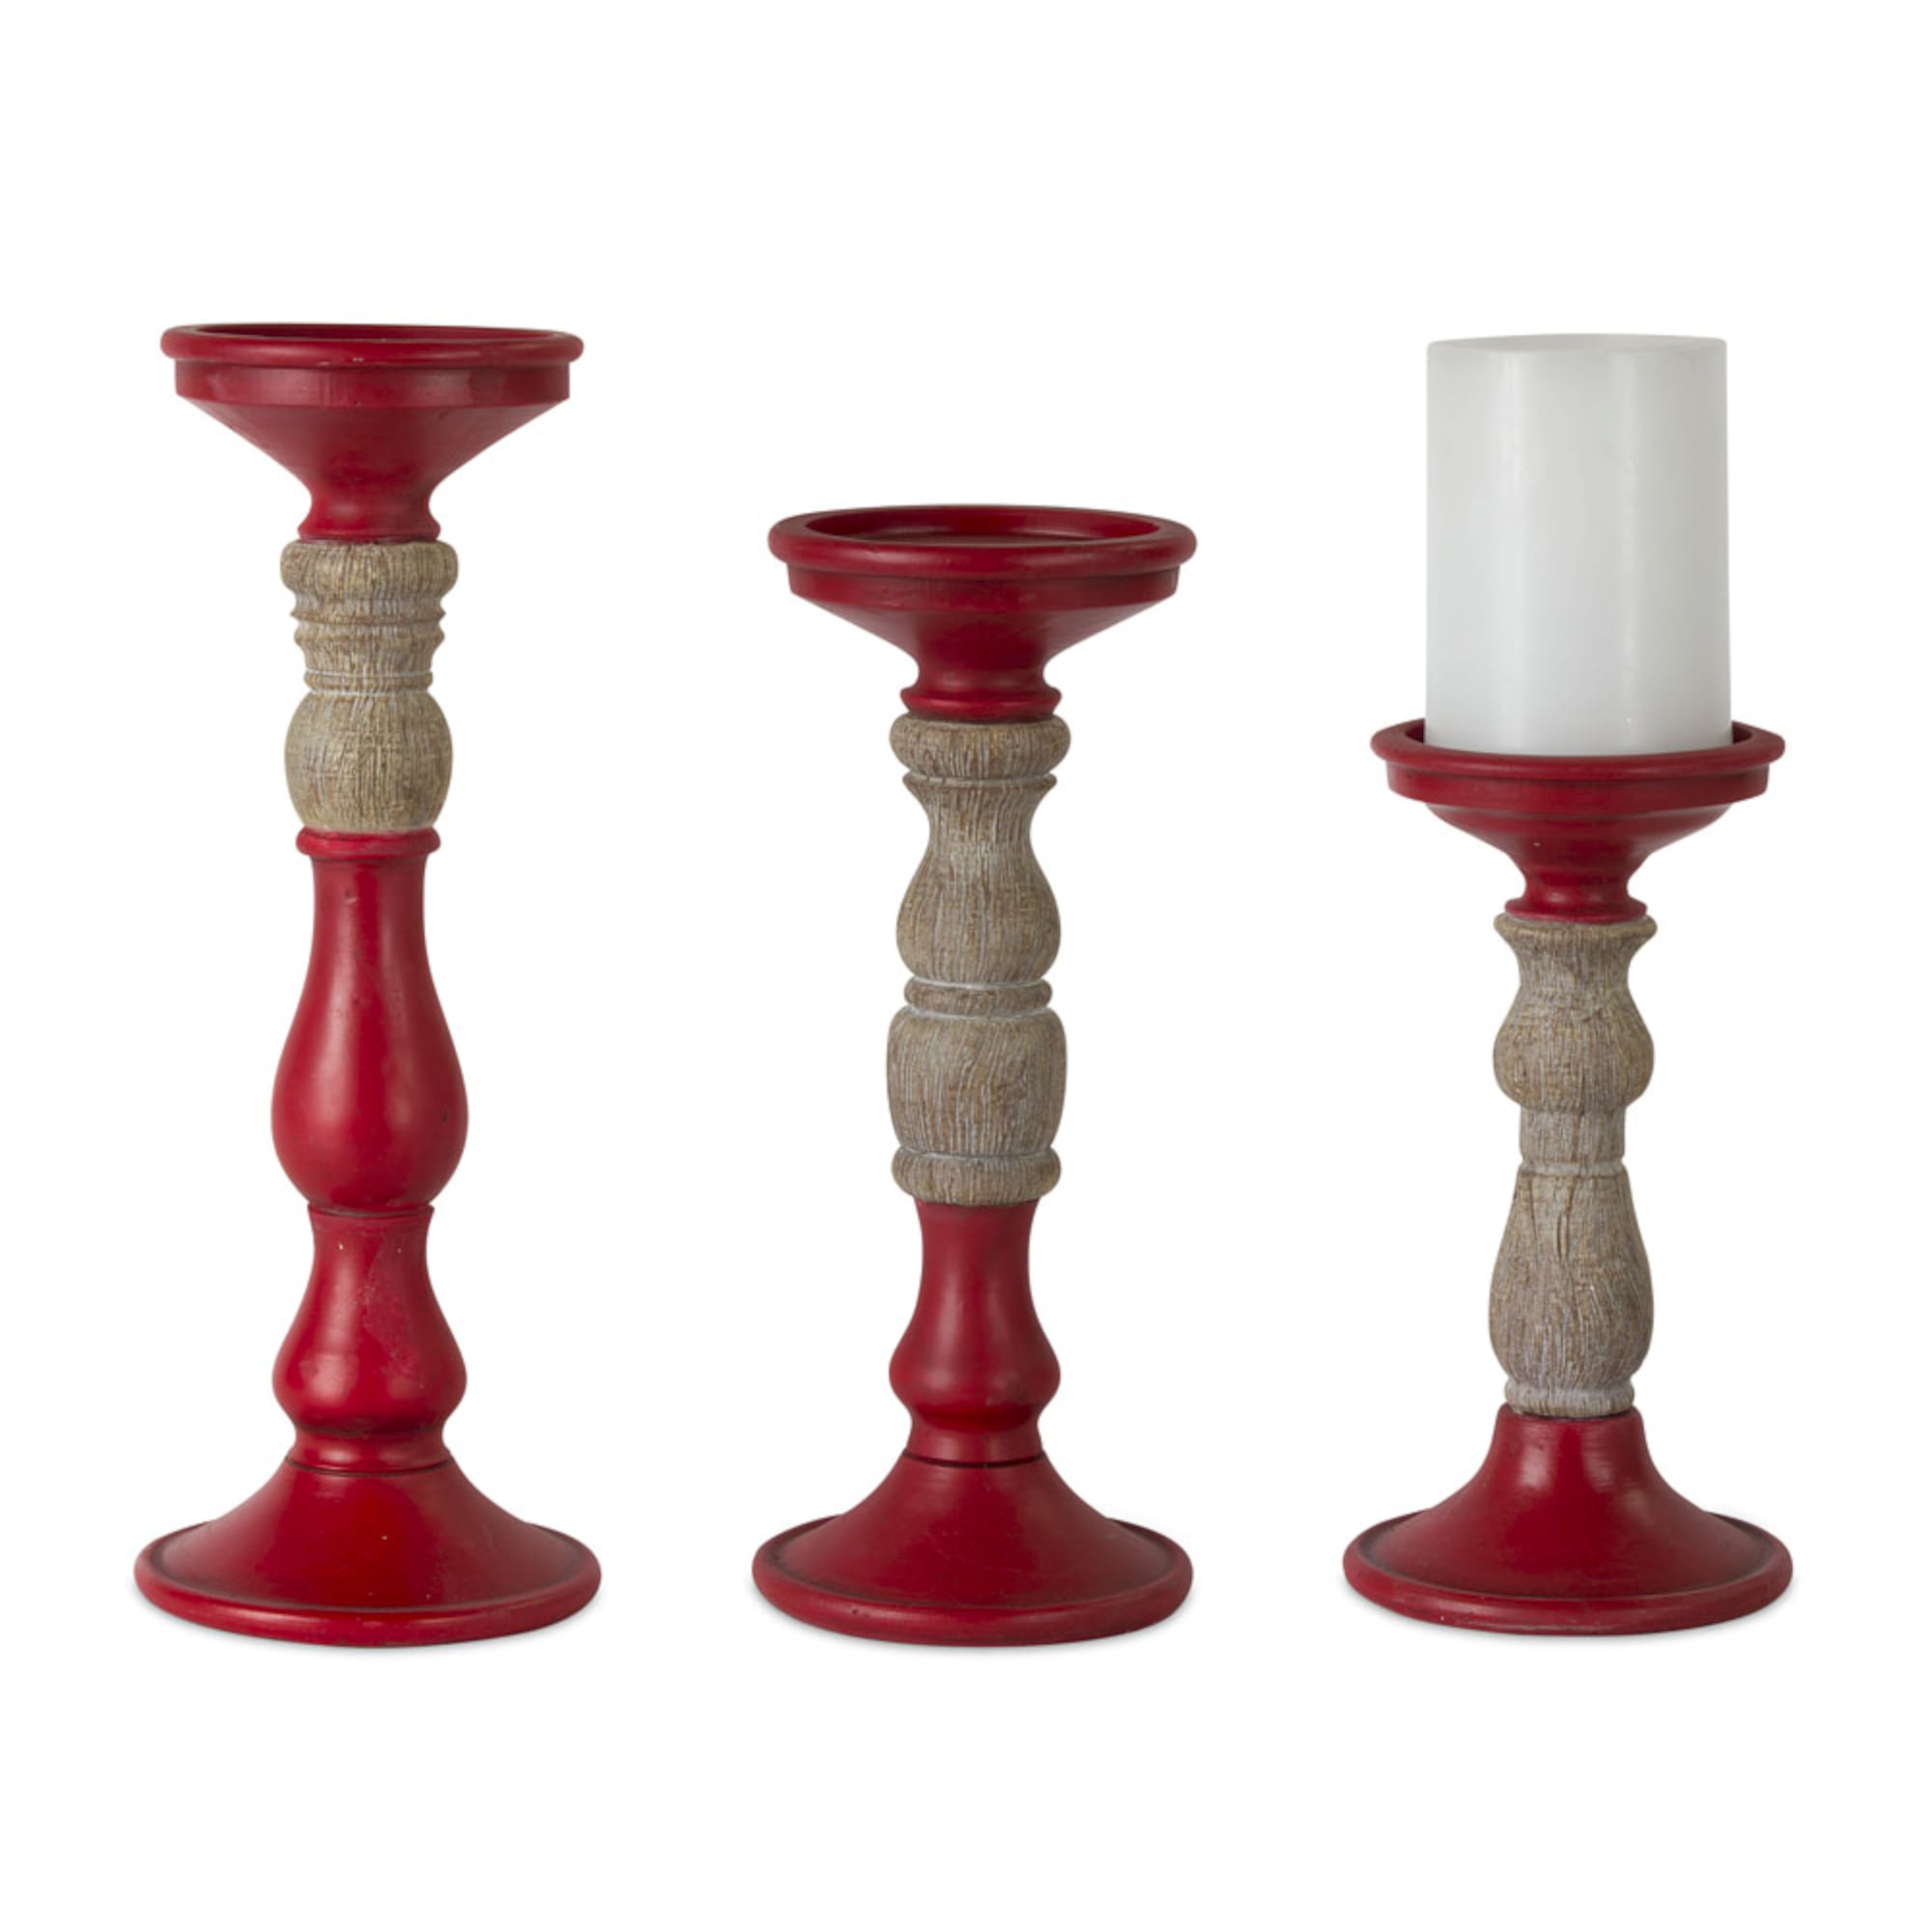 Candle Holder (Set of 3) 8.5"H, 10.5"H, 12.5"H Resin